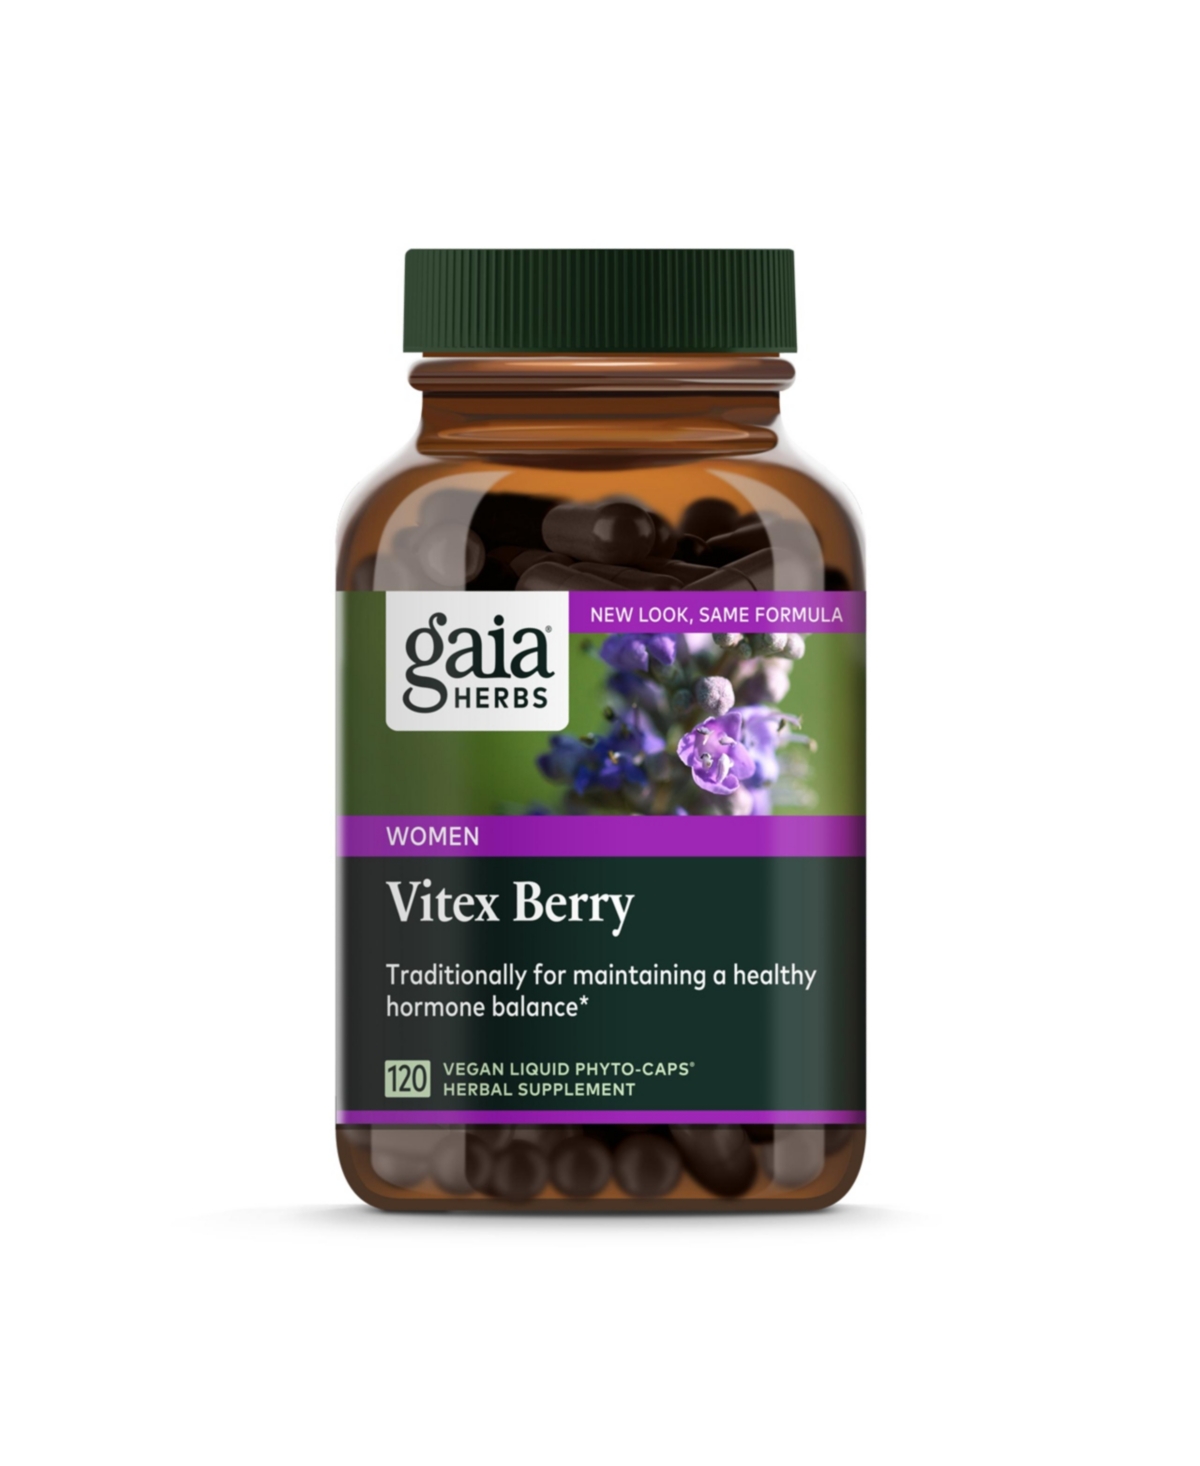 Vitex Berry (Chaste Tree) - Supports Hormone Balance & Fertility for Women - Helps Maintain Healthy Progesterone Levels to Support Menstrua